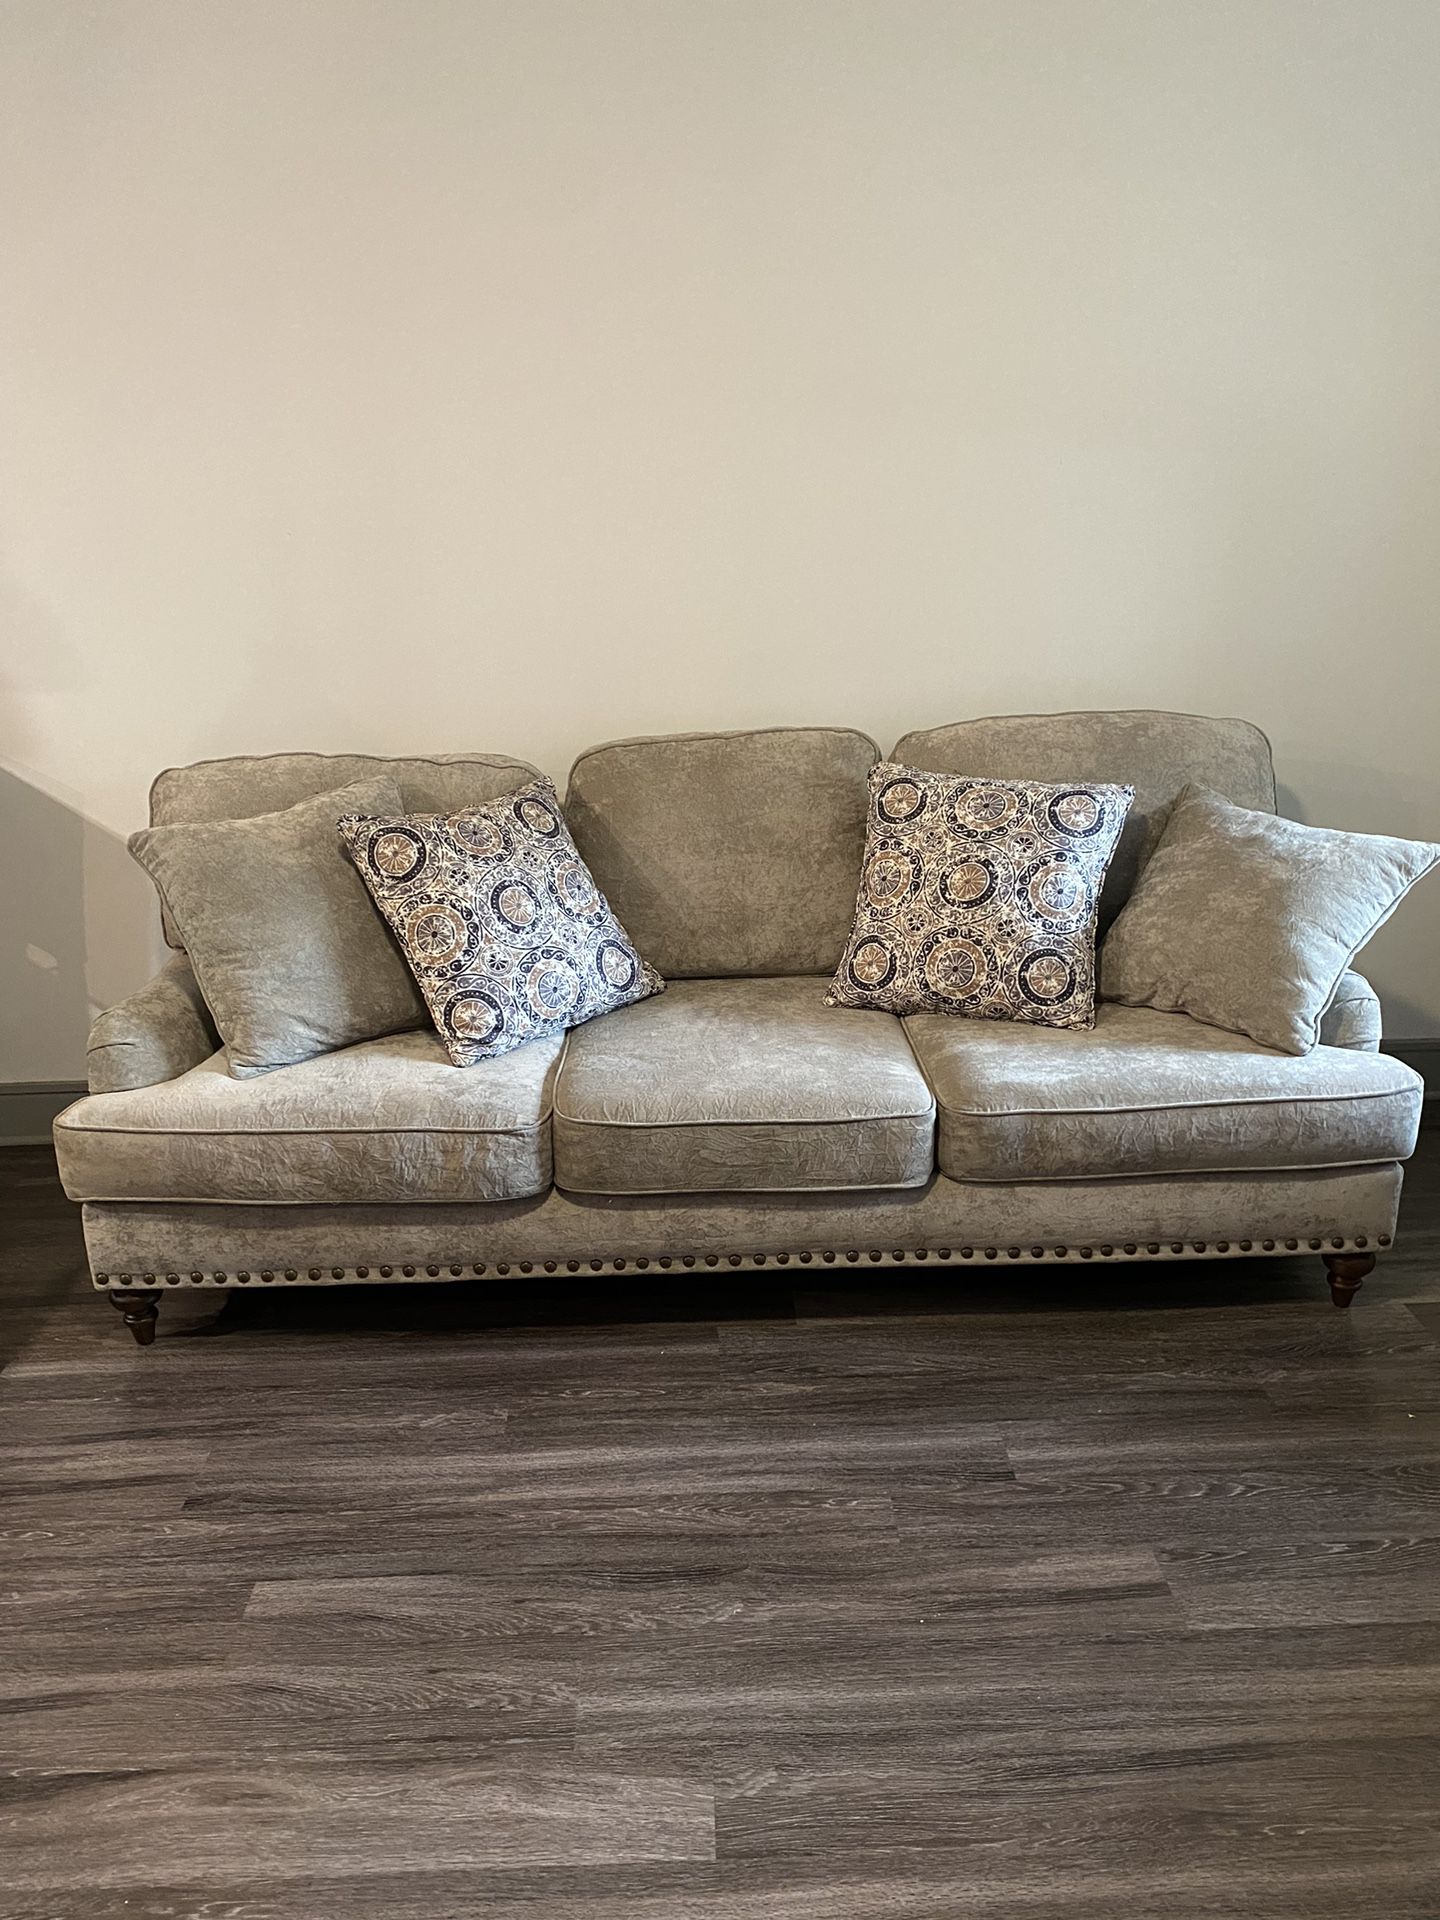 Modern Elegance Loveseat & Couch - Gently Used, Grayish-Tan with Bronze Accents